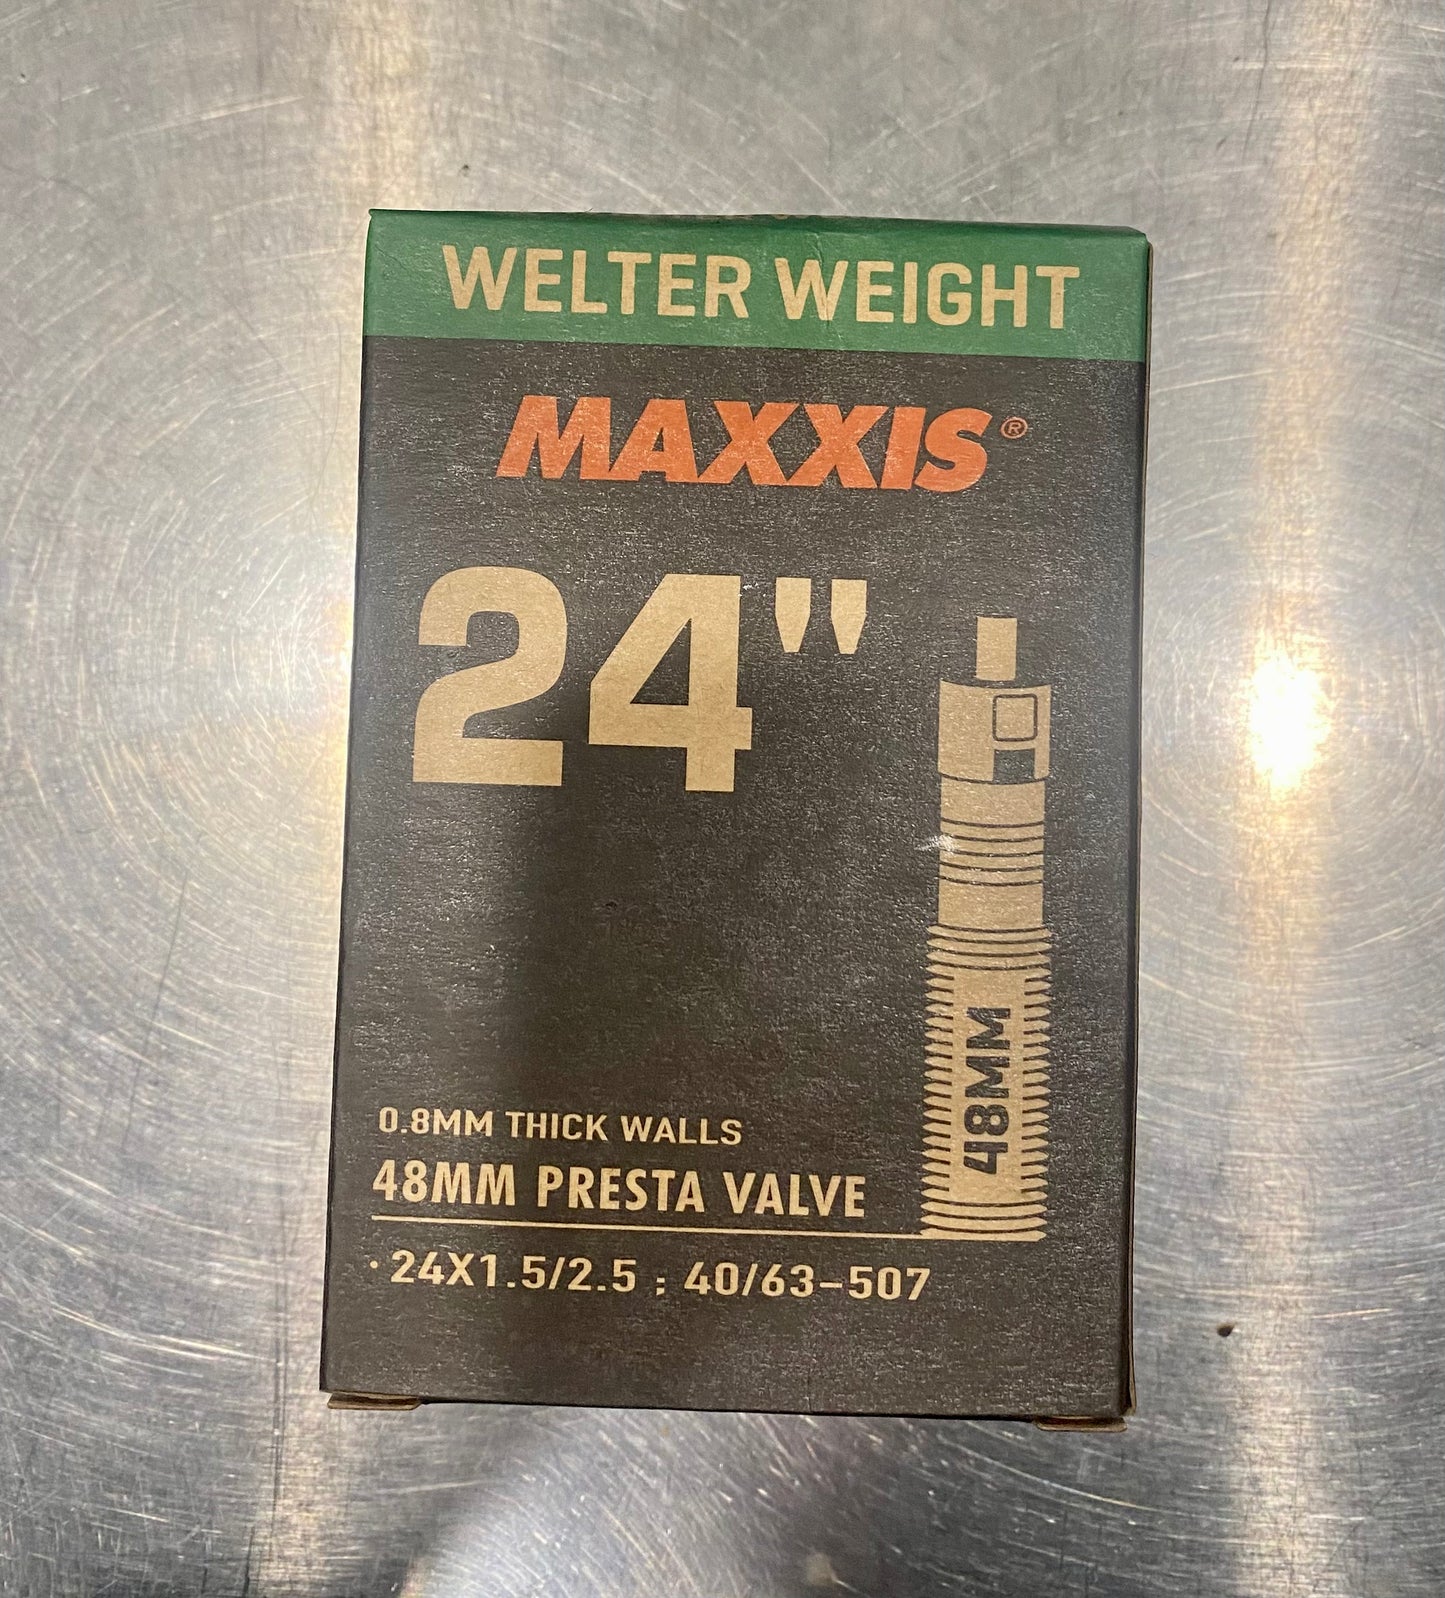 MAXXIS Welter Weight Tubes